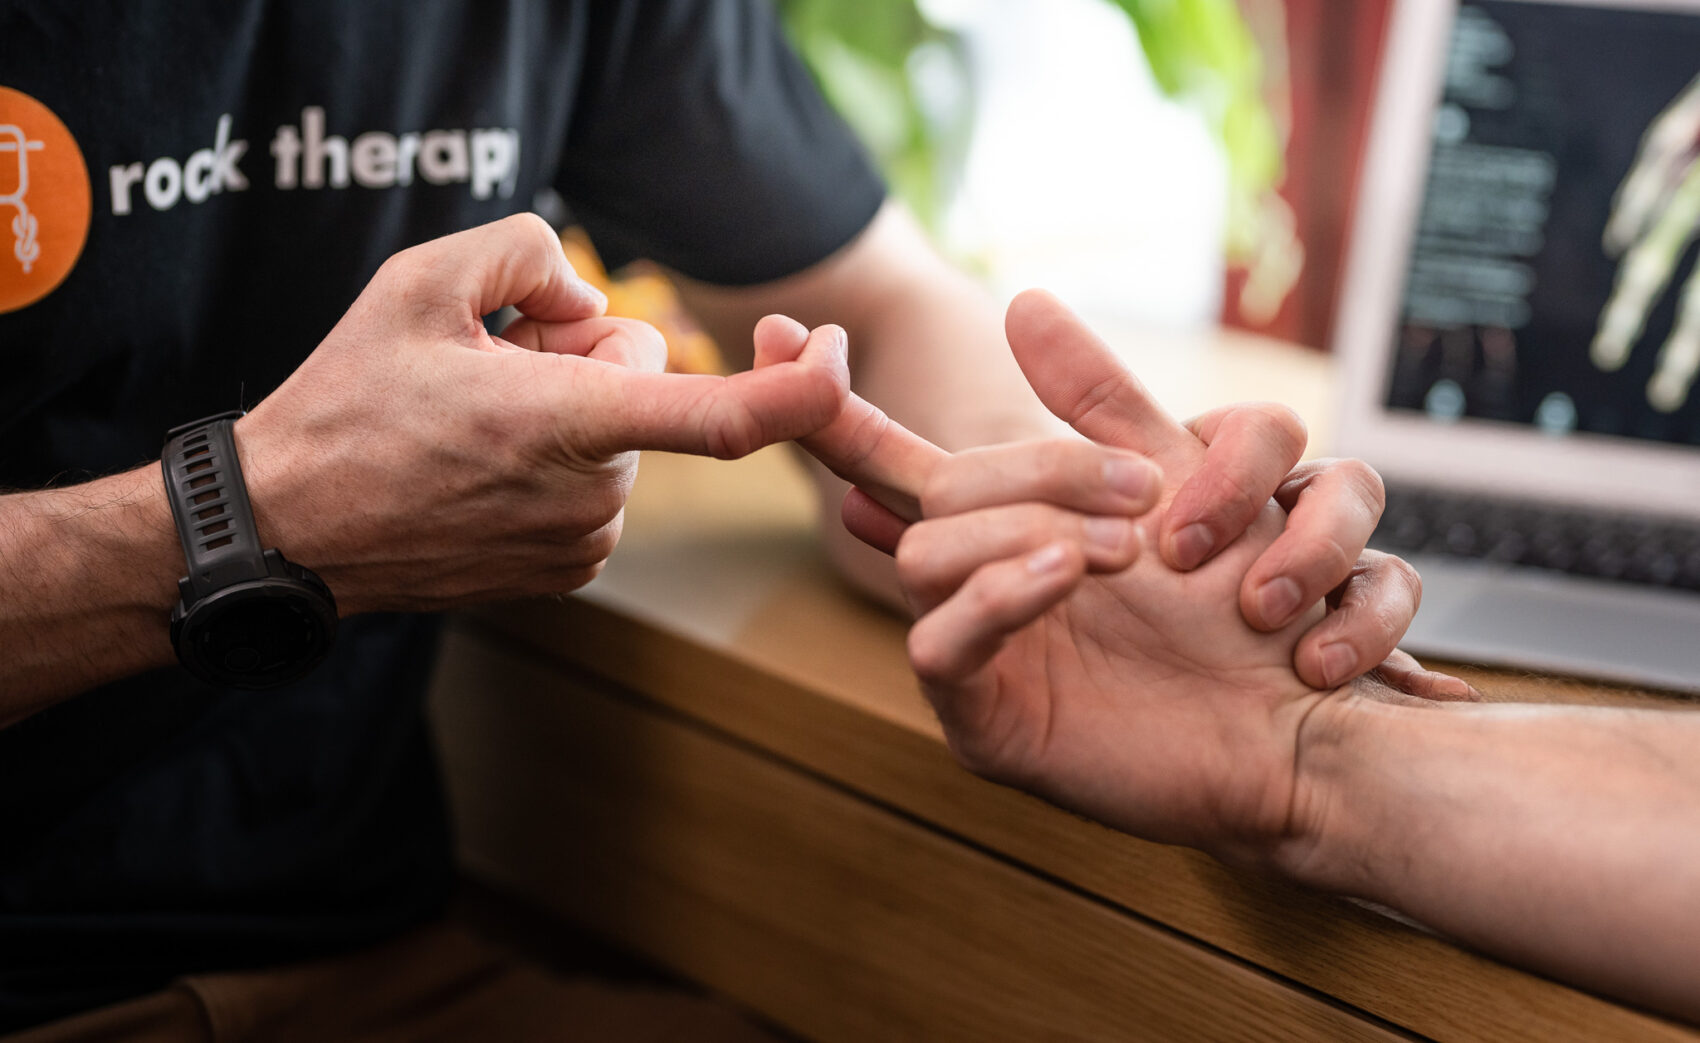 Therapy for finger pain